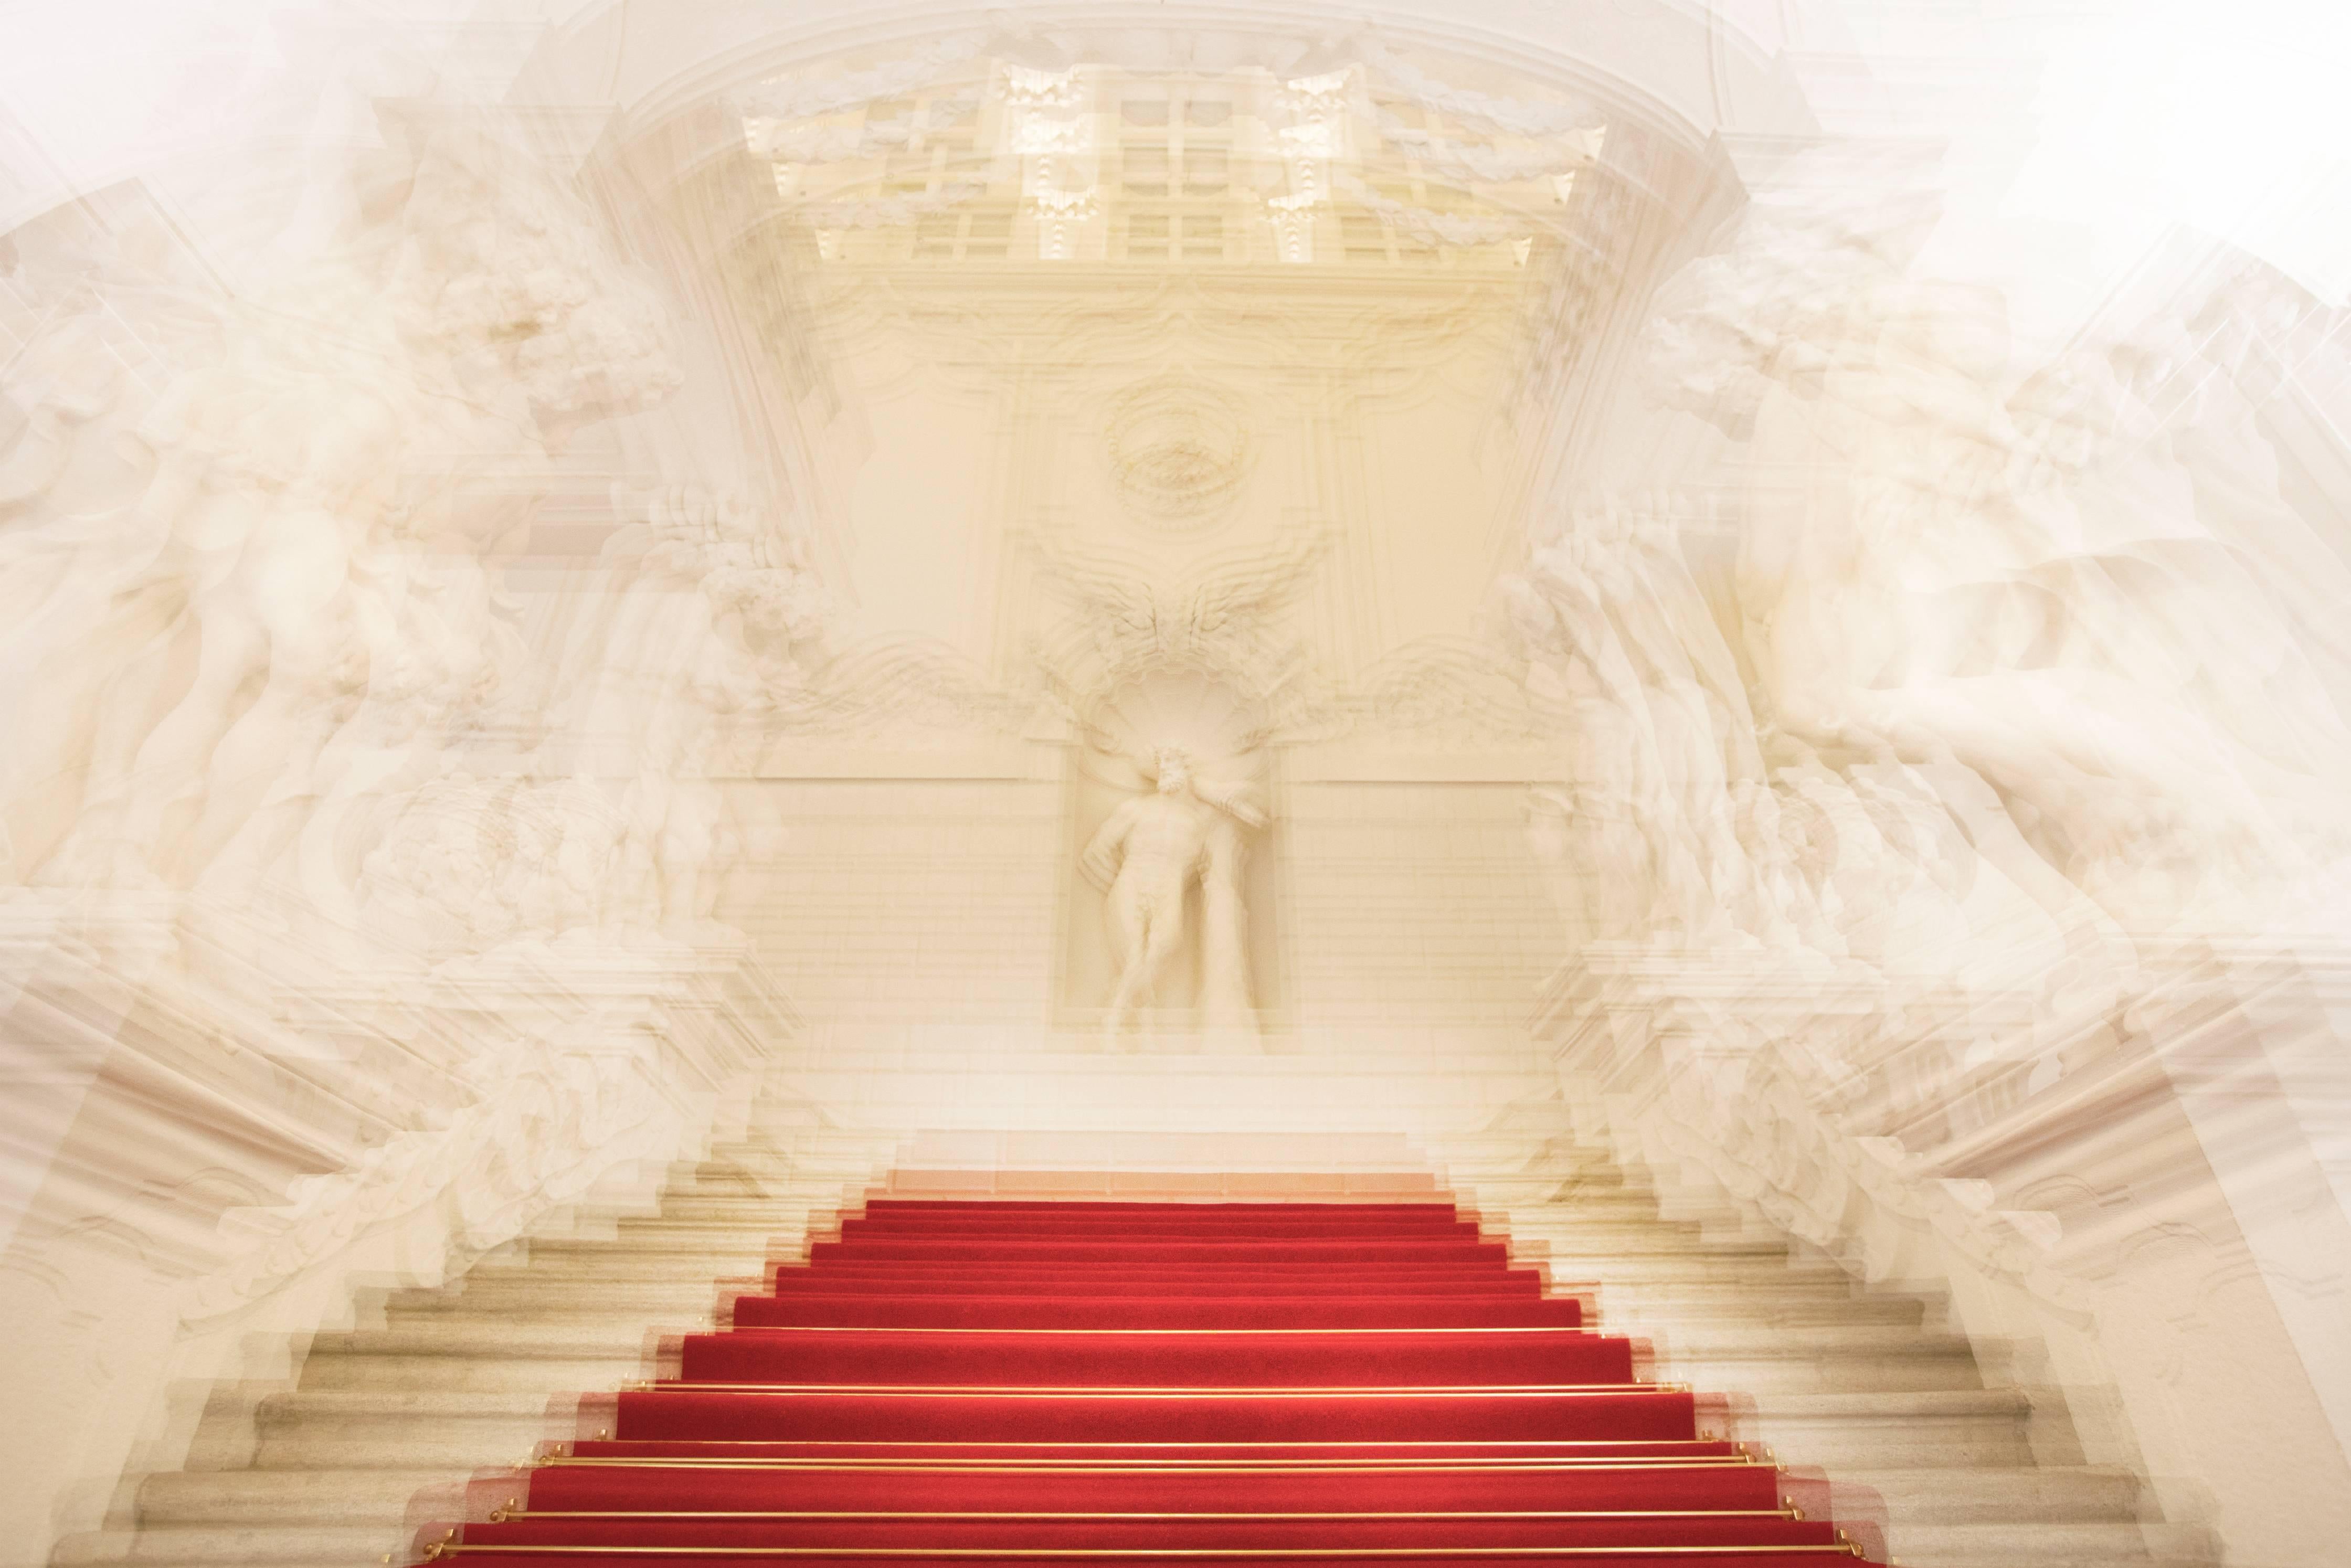 Magda Von Hanau Color Photograph - Belvedere Winter Palace. Abstract architectural limited edition color photograph